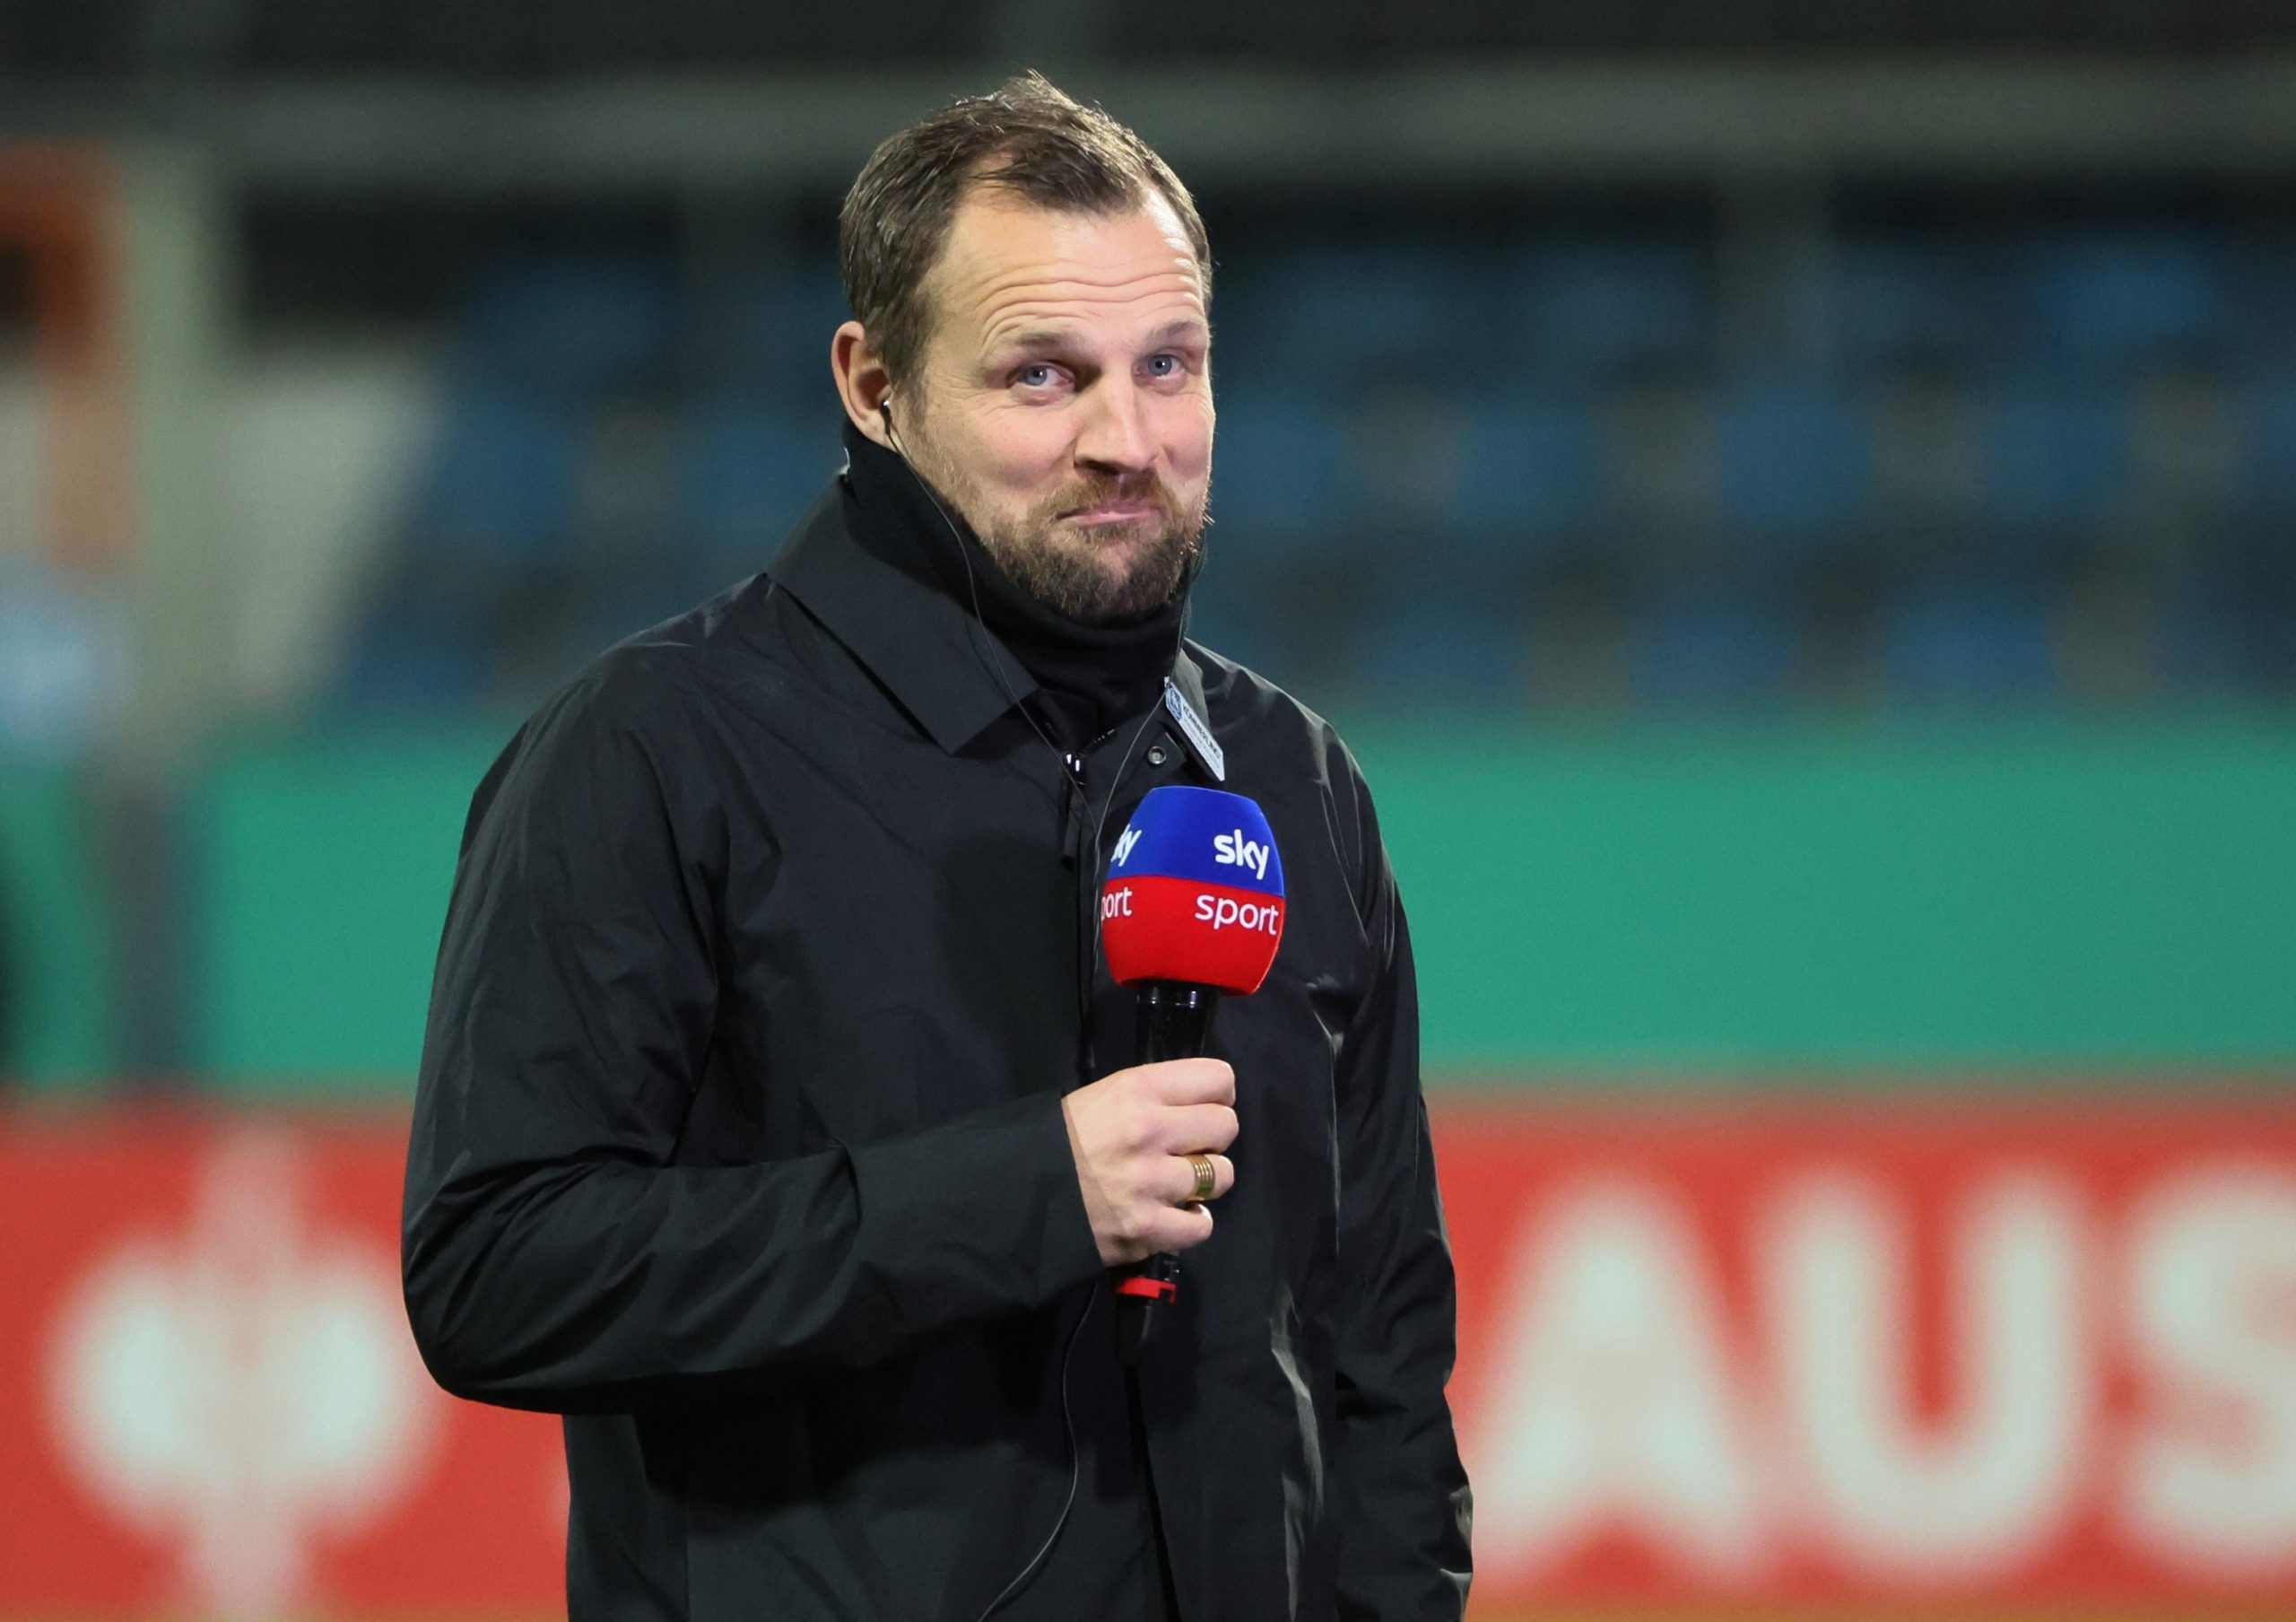 Soccer Football - DFB Cup - Round of 16 - VfL Bochum v 1. FSV Mainz 05 - Ruhrstadion, Bochum, Germany - January 18, 2022 1.FSV Mainz 05 coach Bo Svensson is interviewed before the match REUTERS/Wolfgang Rattay DFB REGULATIONS PROHIBIT ANY USE OF PHOTOGRAPHS AS IMAGE SEQUENCES AND/OR QUASI-VIDEO.